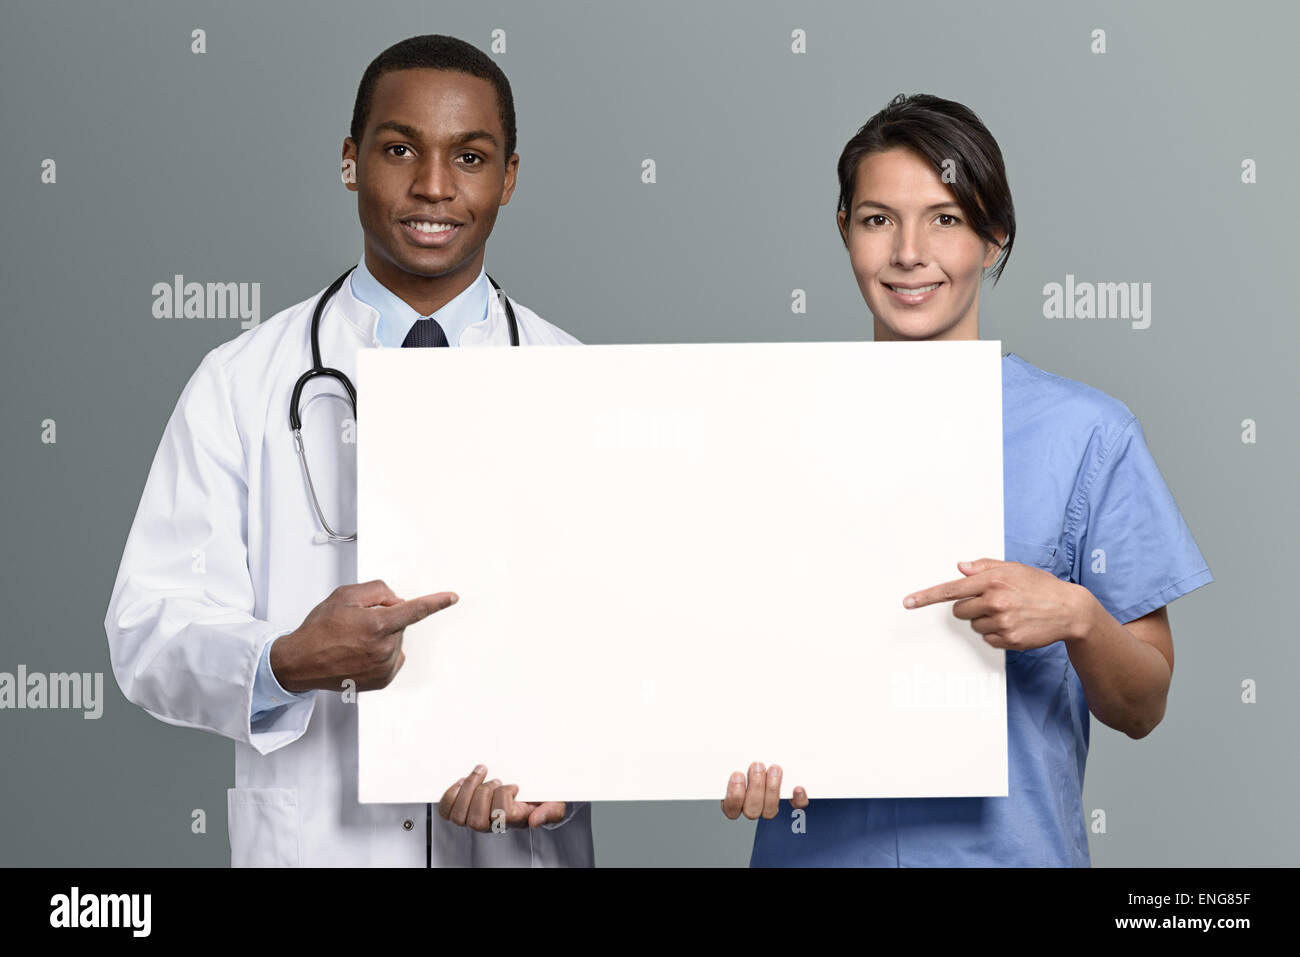 Multiethnic medical team of an African doctor in a lab coat and stethoscope and a nurse in scrubs holding a blank white sign Stock Photo